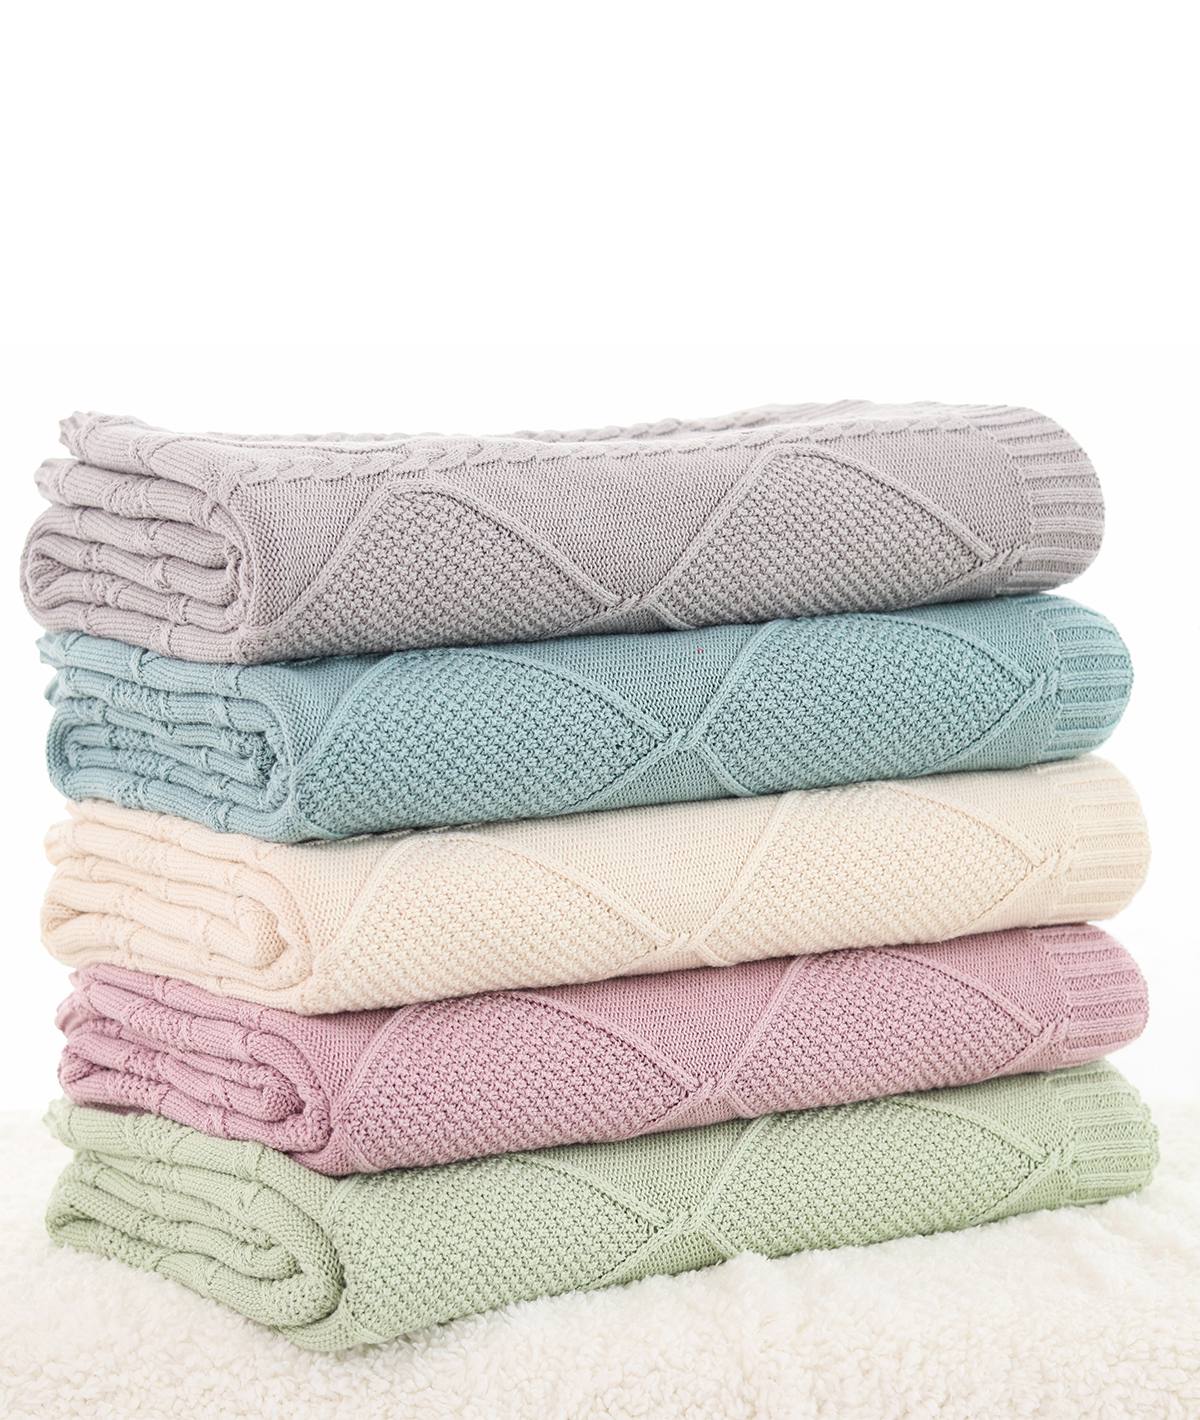 Cotton knitted Throws